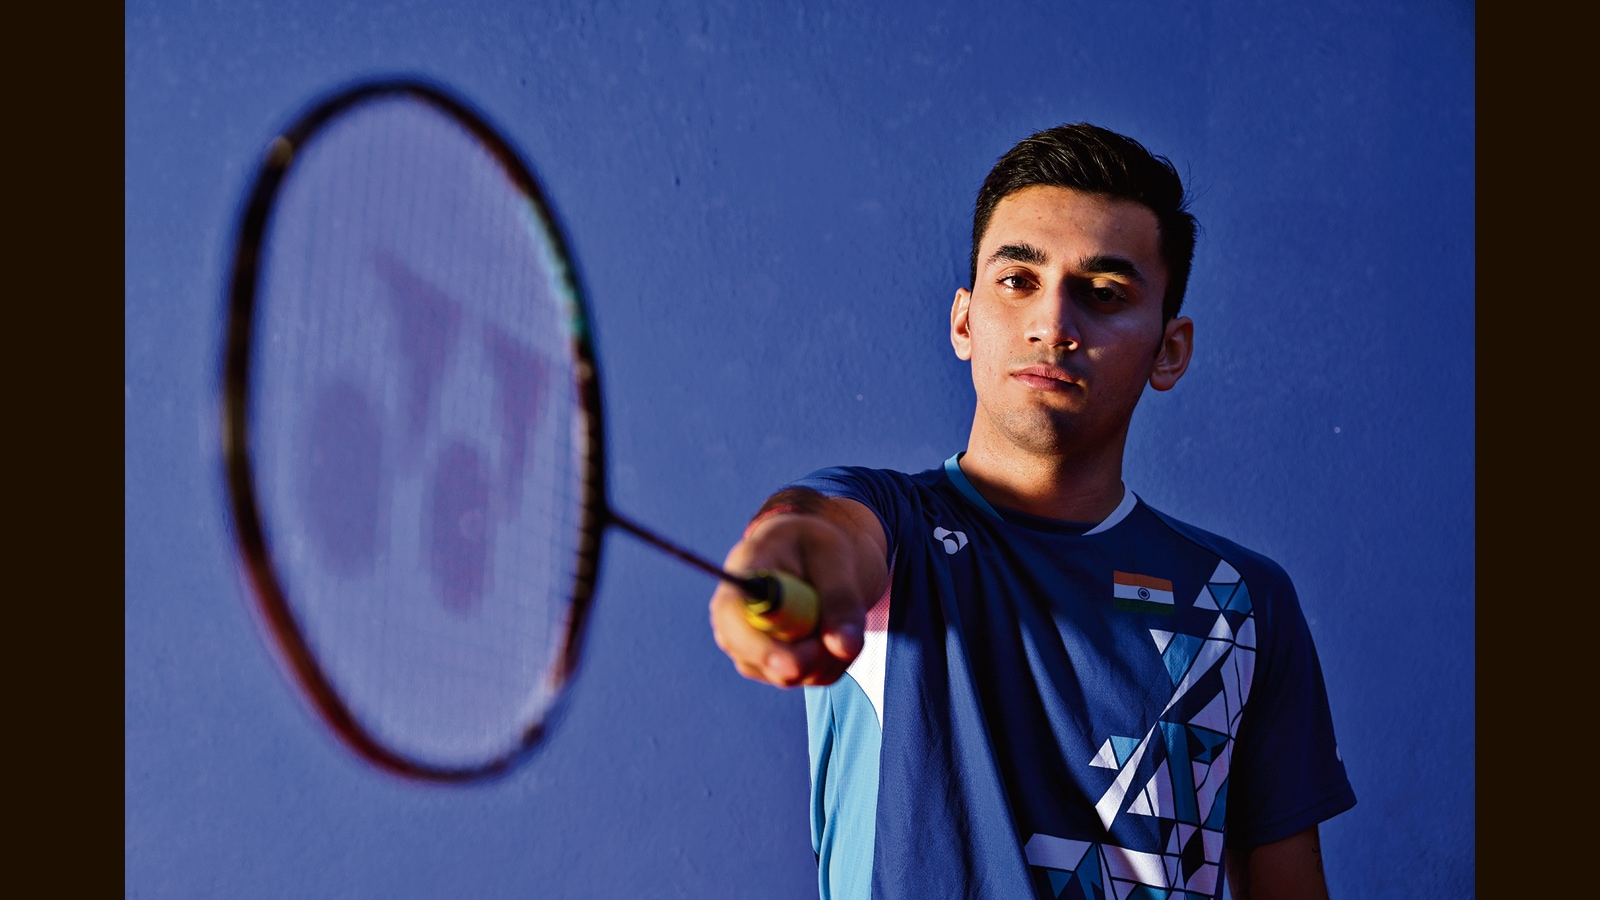 #CWG2022: Lakshya Sen says music and routines hold him centered